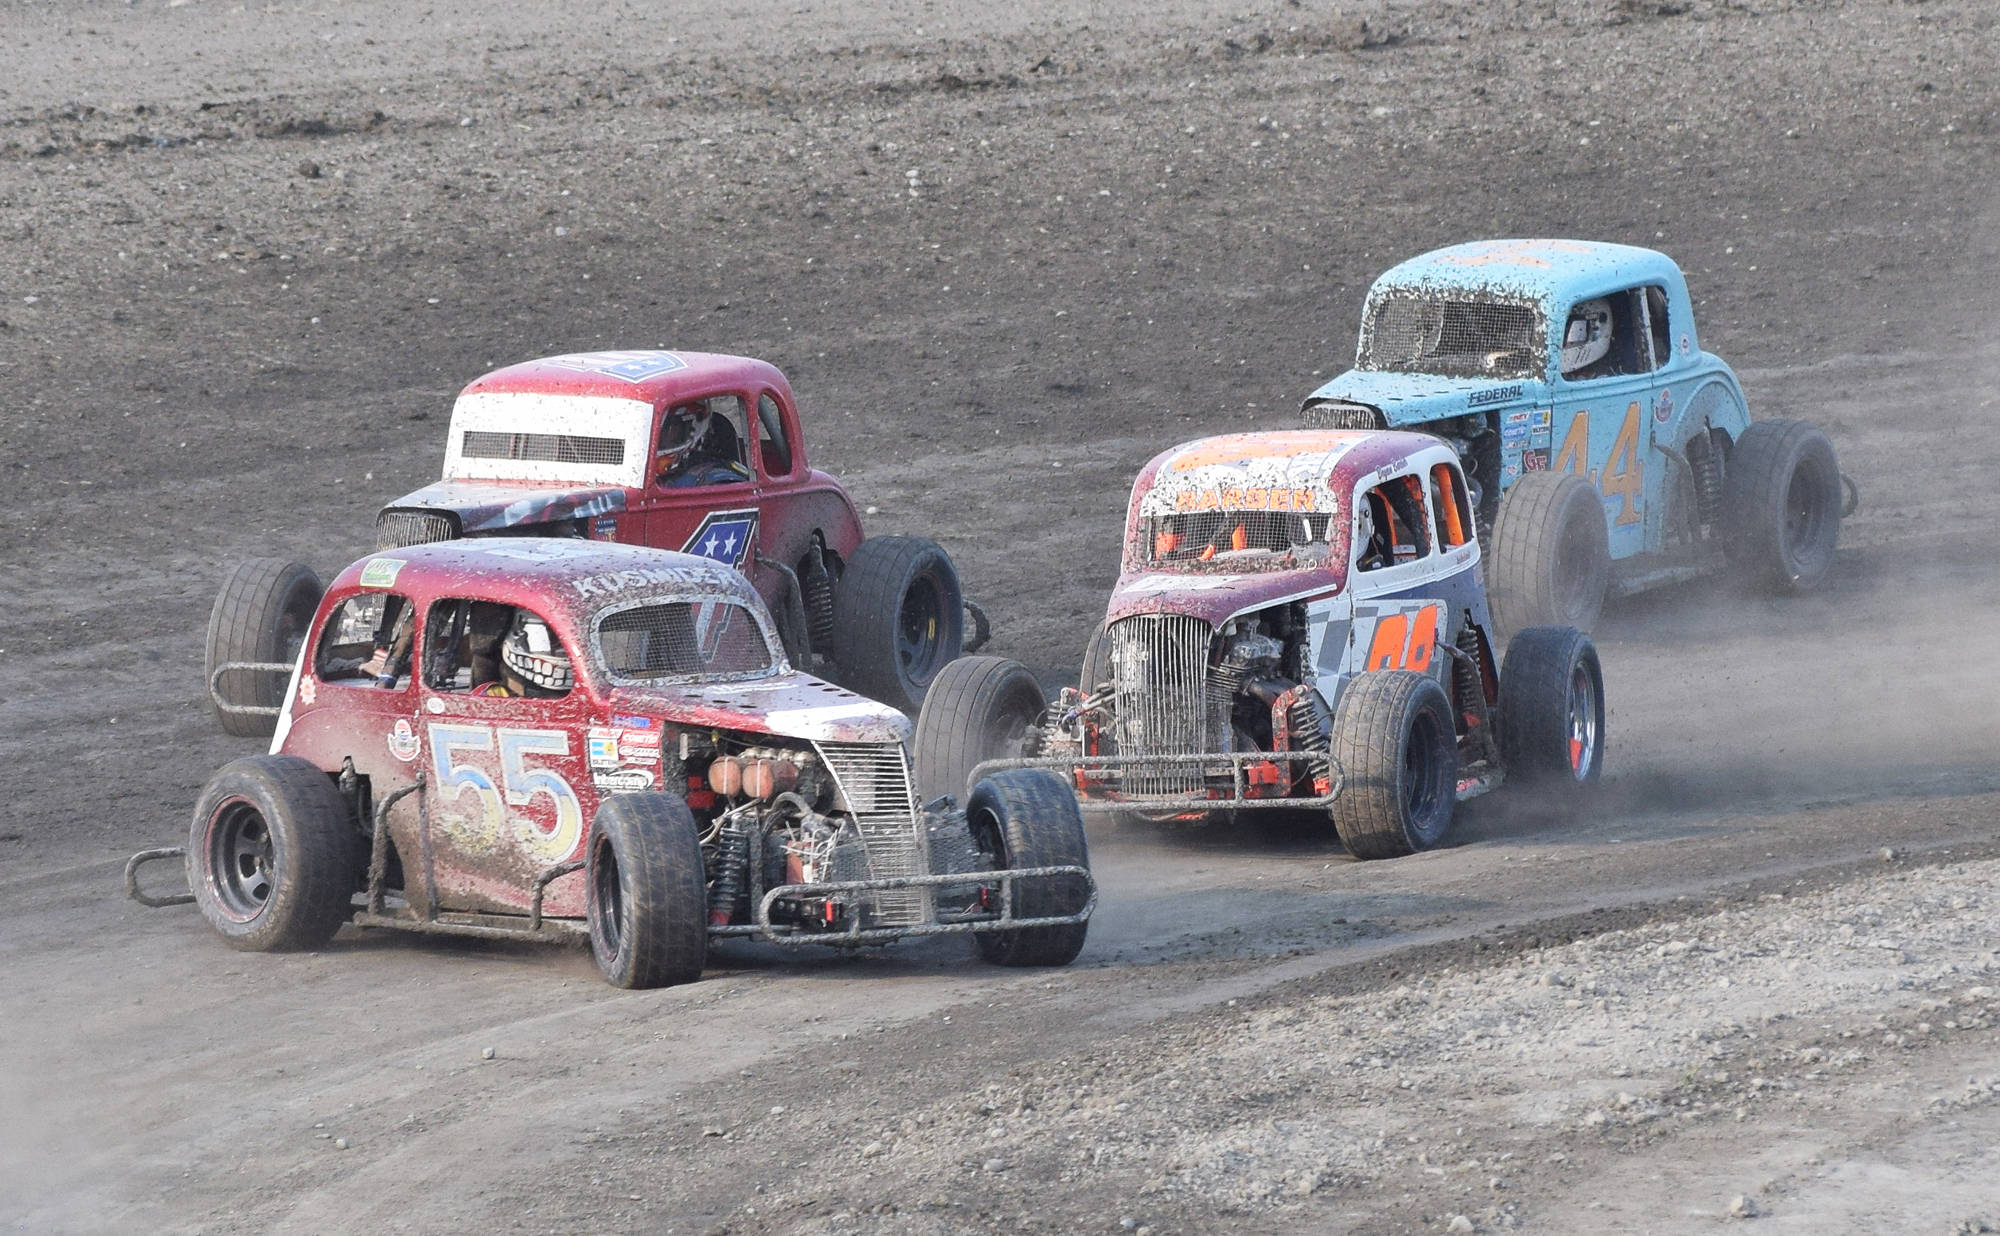 The #55 Legends car of David Kusmider spins in front of the field Saturday, June 29, 2019, at Twin Cities Raceway in Kenai, Alaska. (Photo by Joey Klecka/Peninsula Clarion)